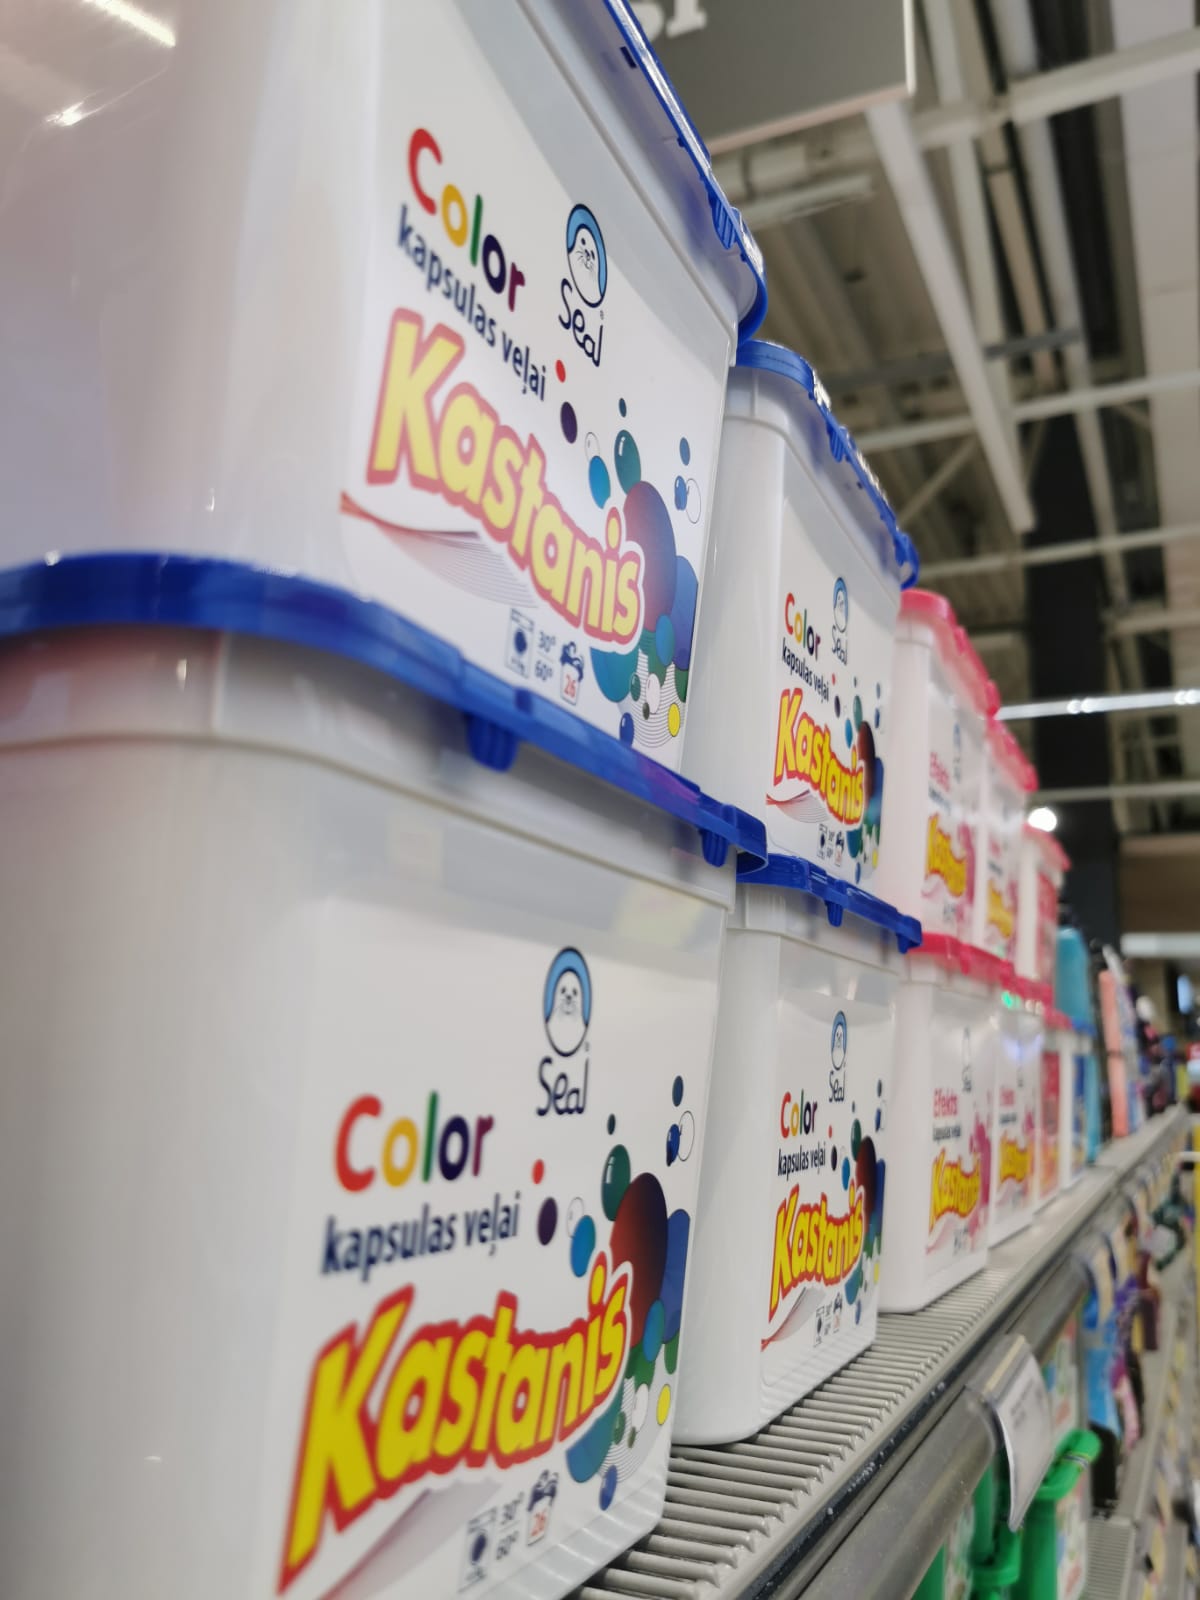 laundry capsules from brand seal of Spodrība put on a shelf as a result of successful merchandising work